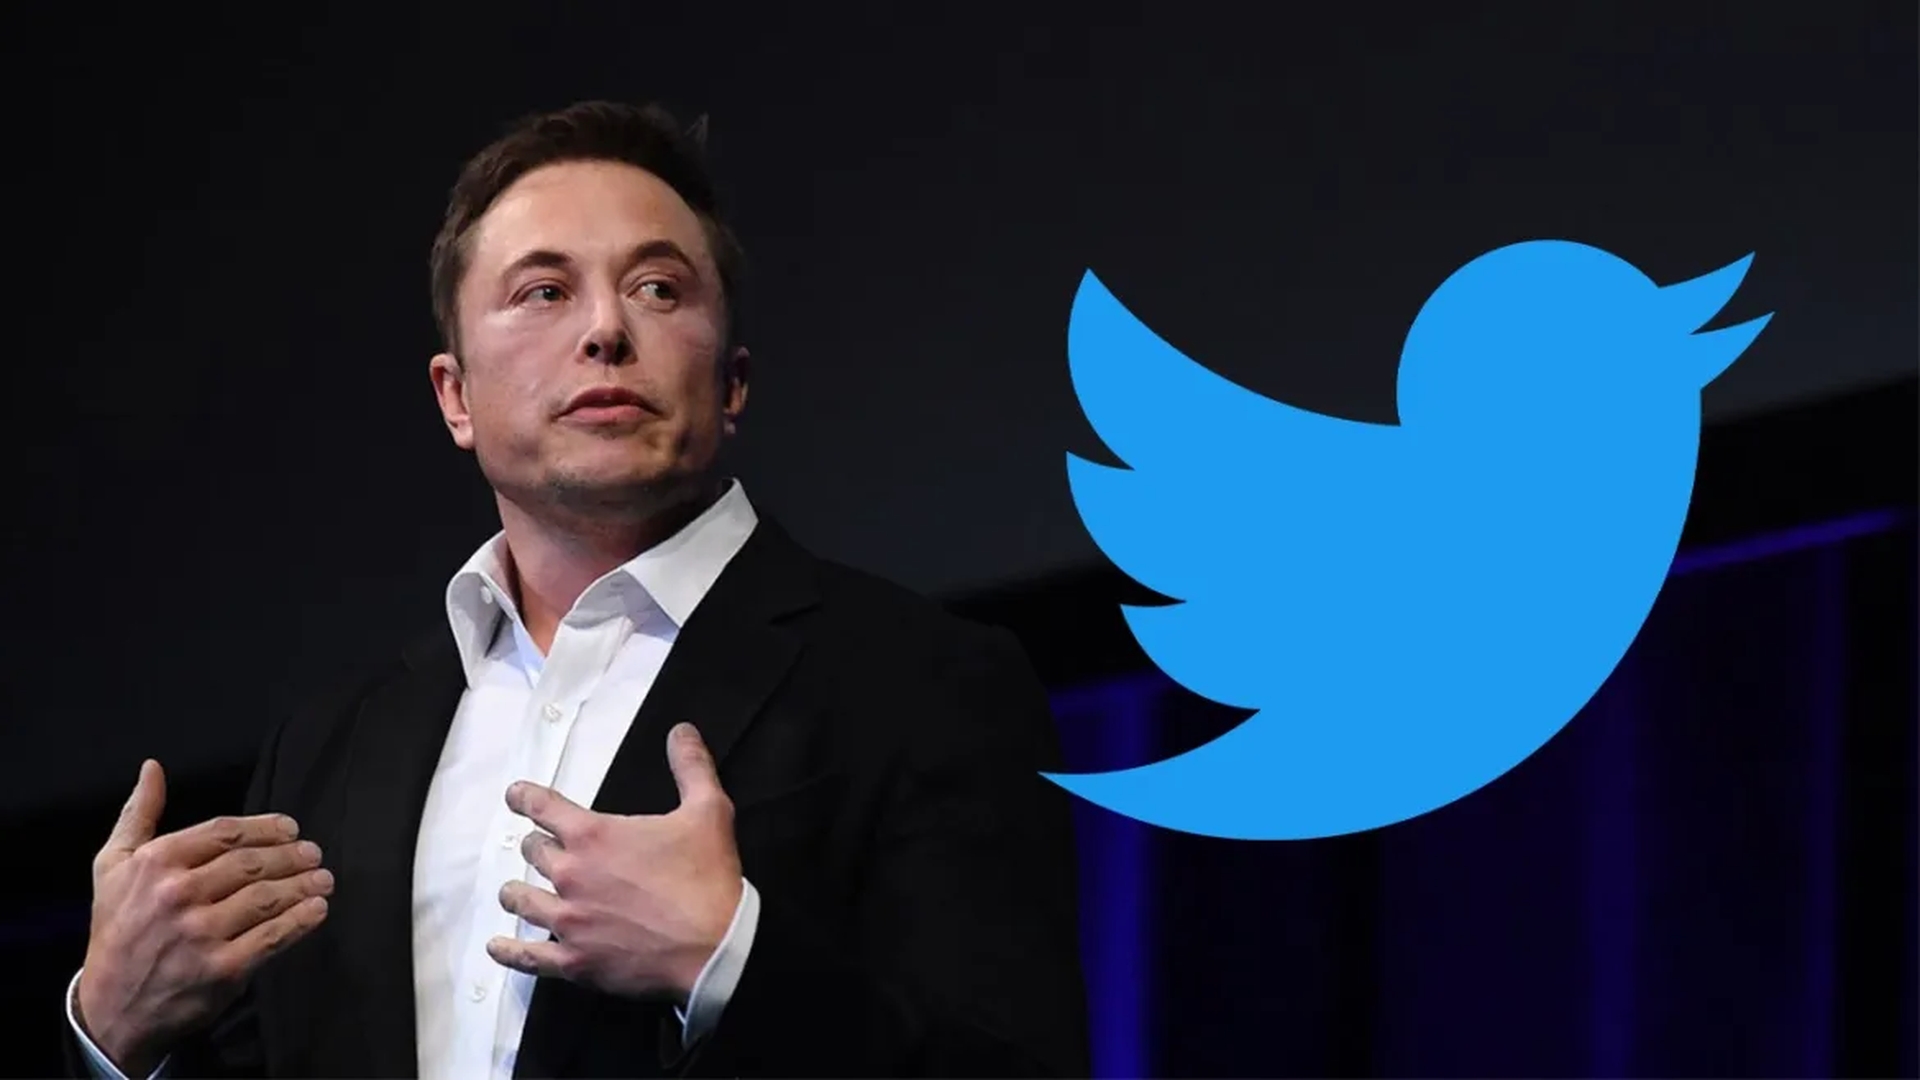 After Tesla CEO decided not to buy Twitter, things got heated up with legal filings, and now Elon Musk challenges Twitter CEO to a debate about bots.